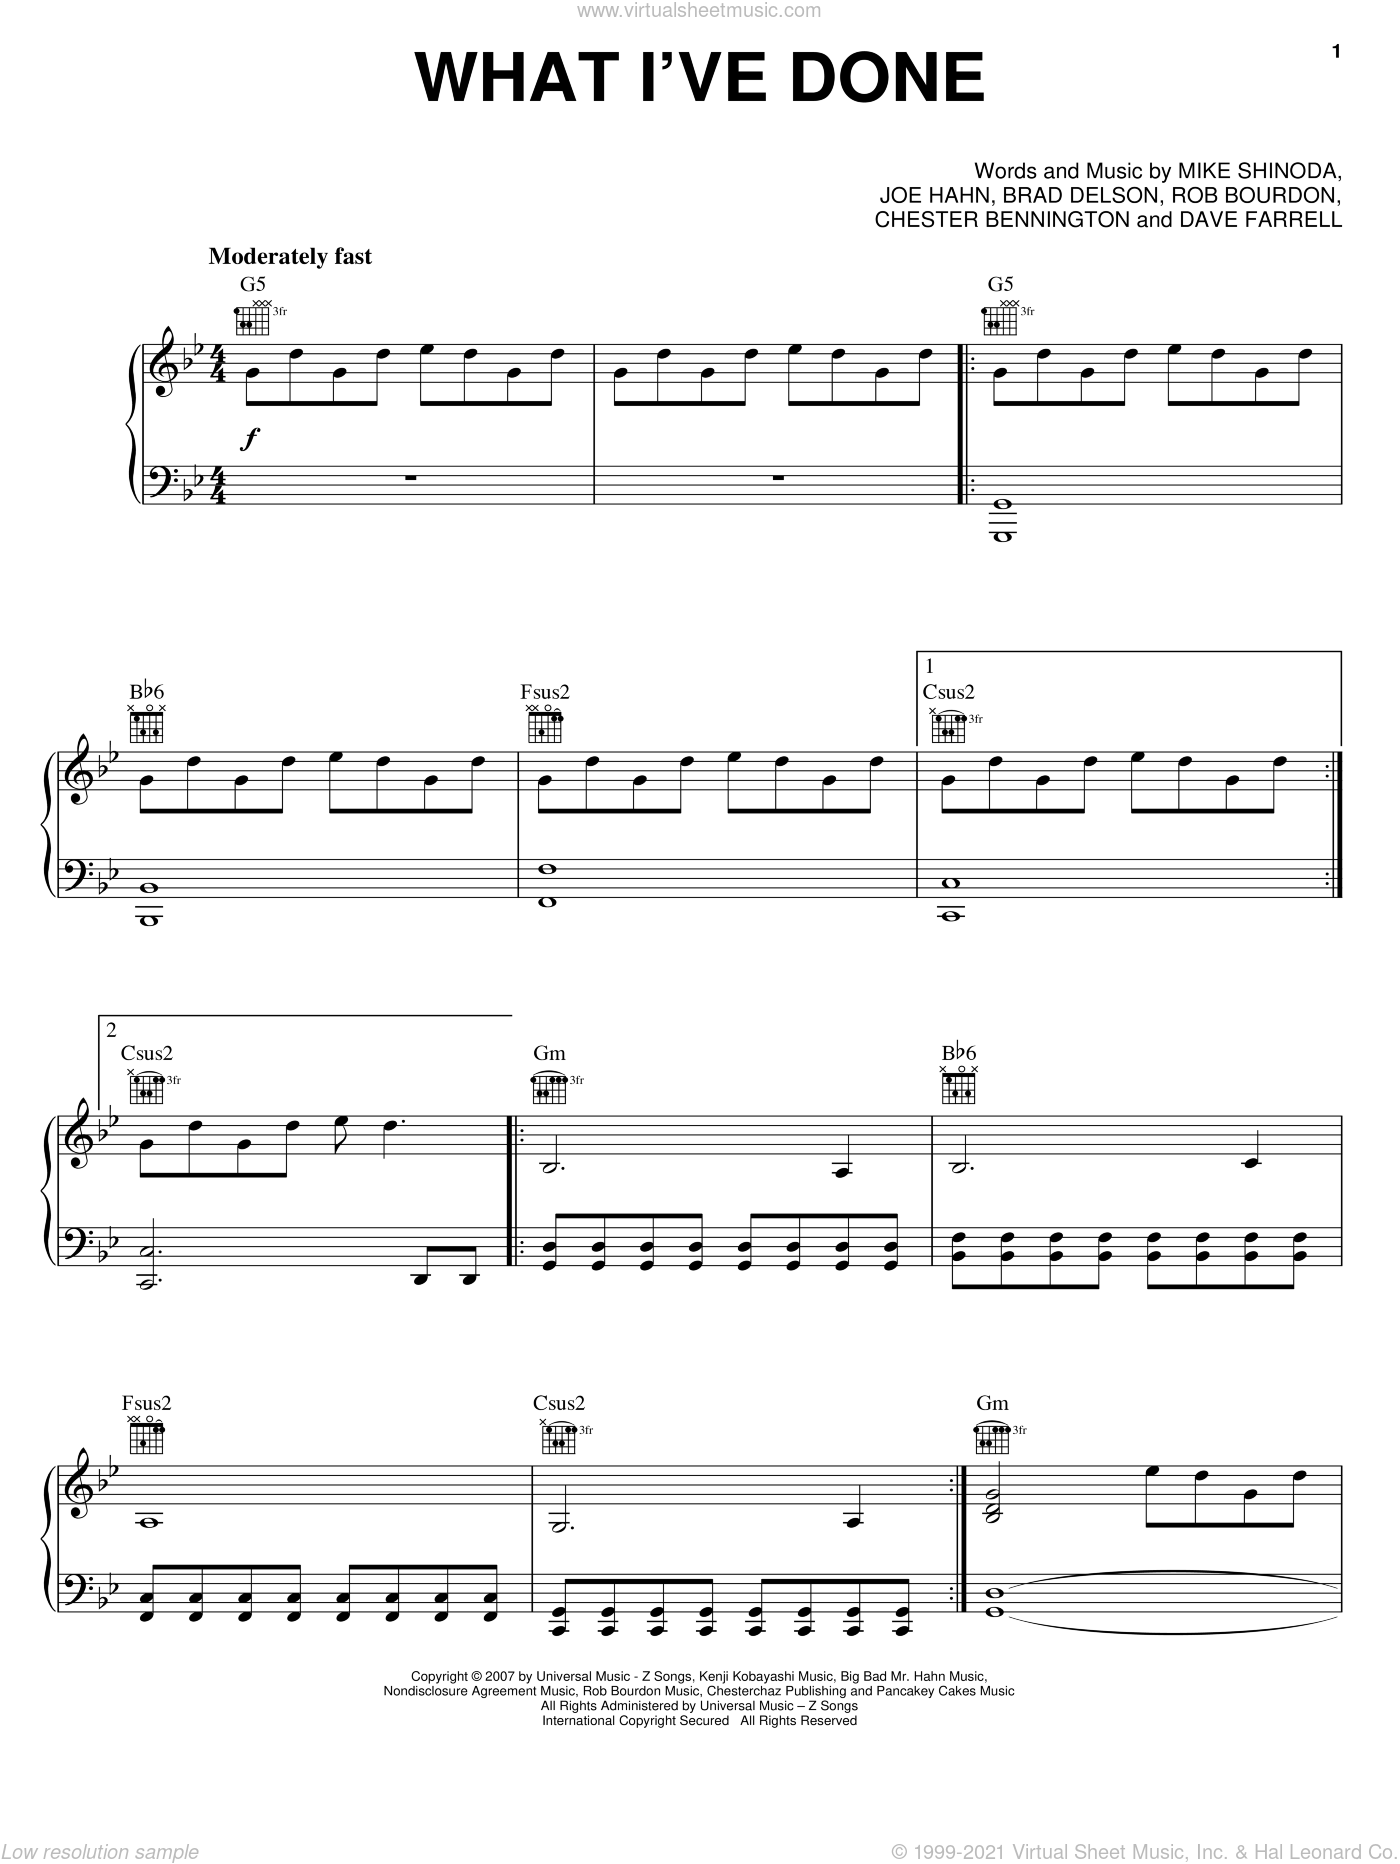 What I've Done sheet music for voice, piano or guitar (PDF)